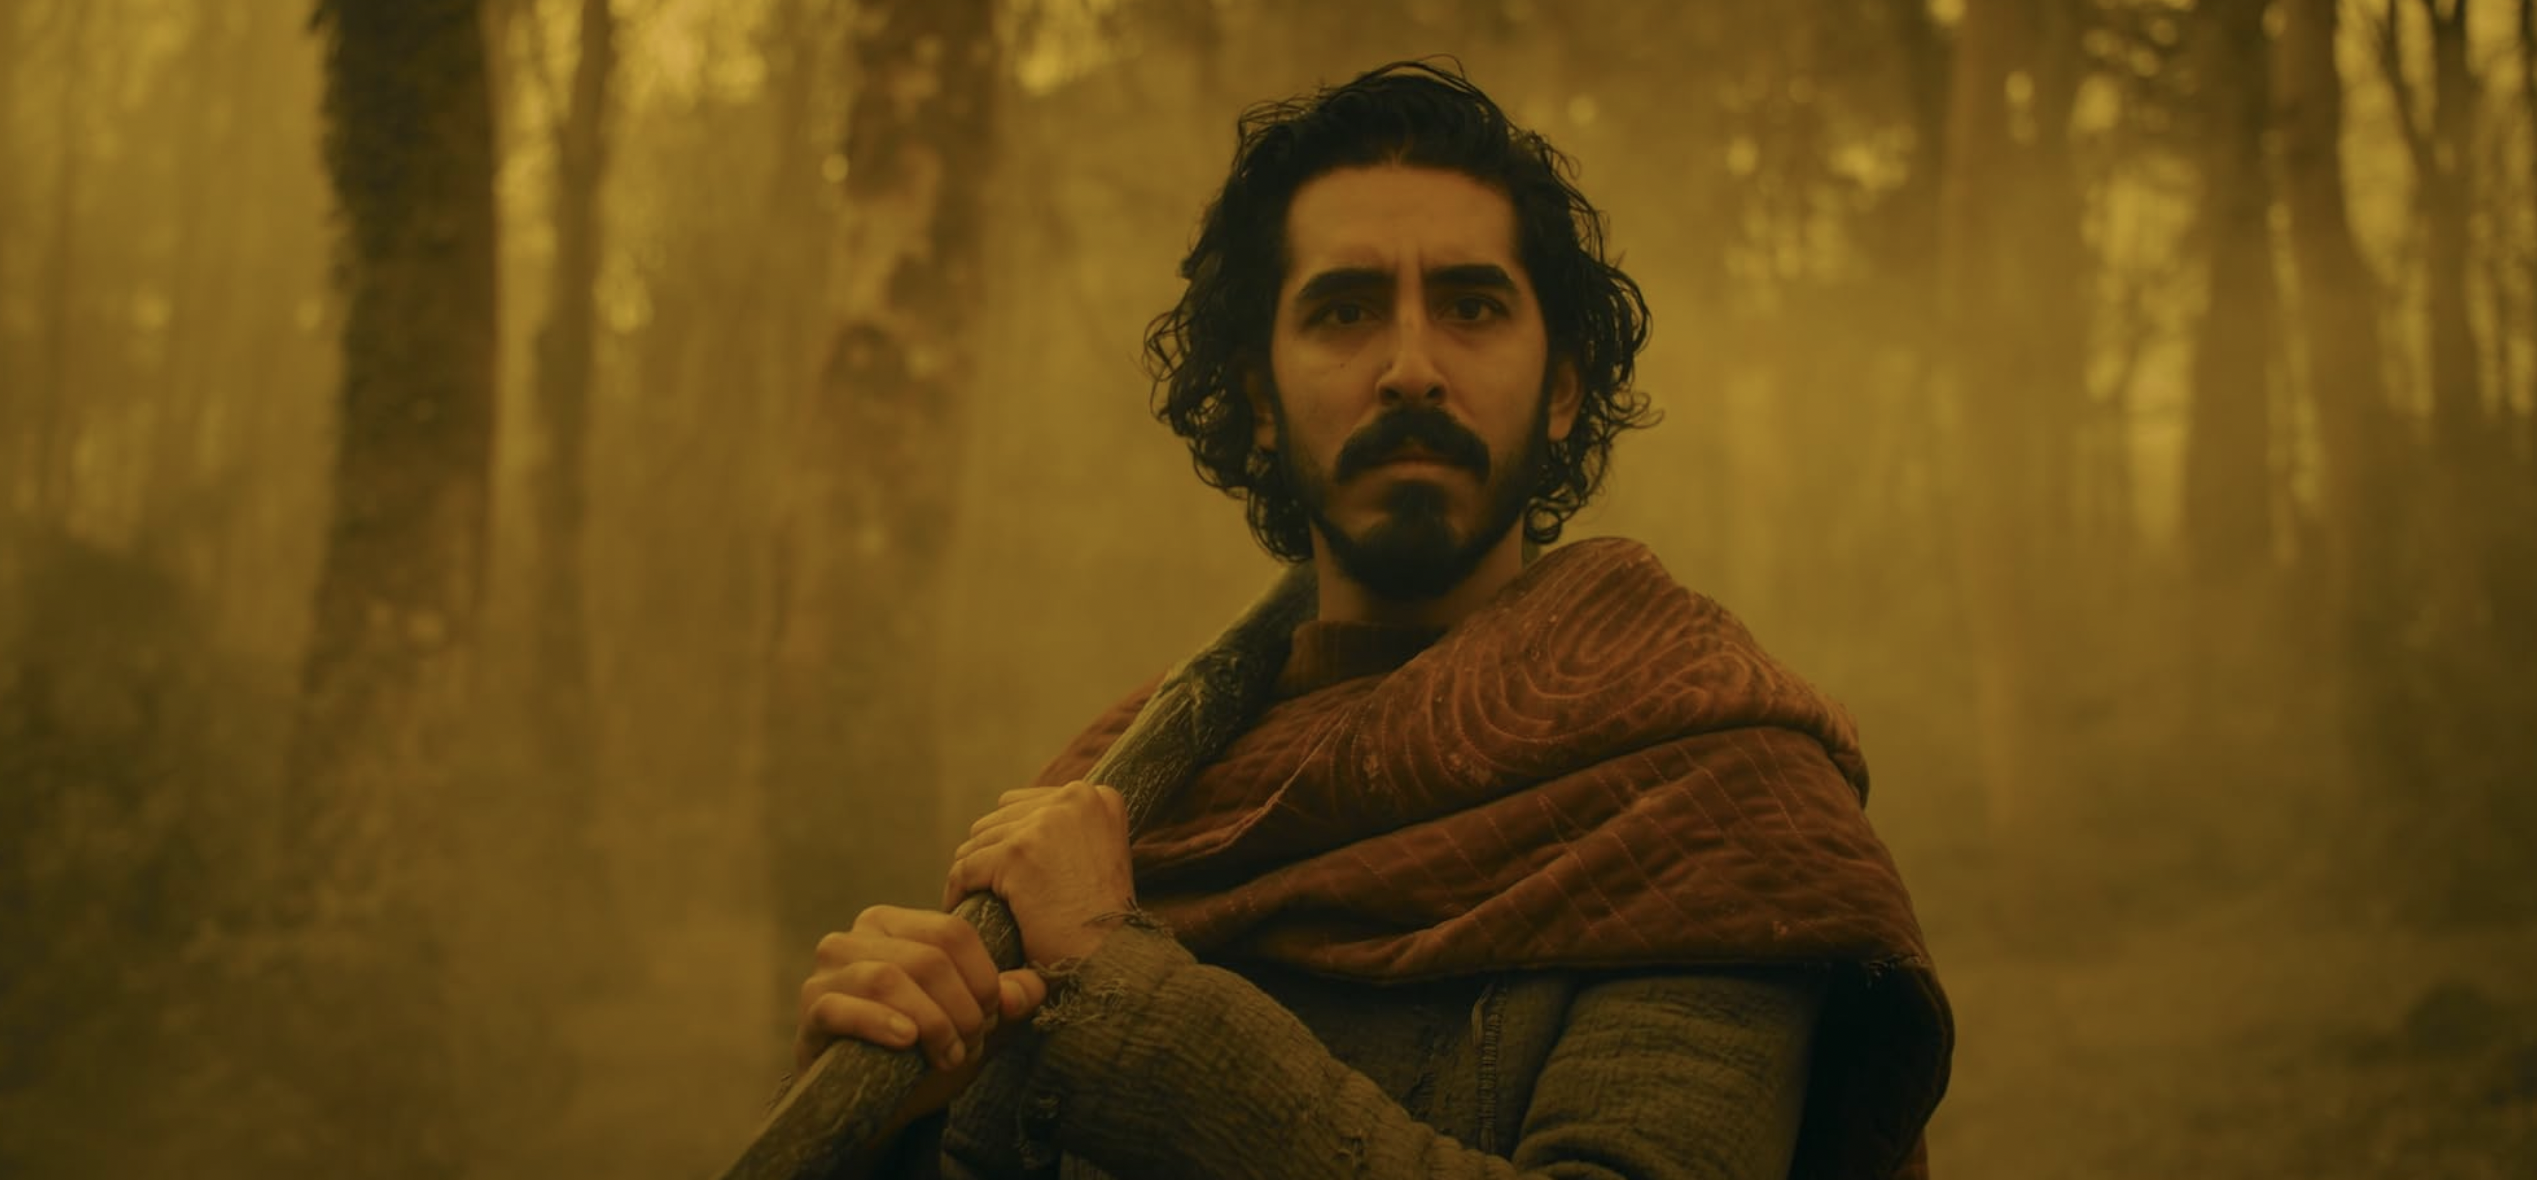 Dev Patel as Gawain standing in a forest in yellow mist in The Green Knight (2021) (IMDb)